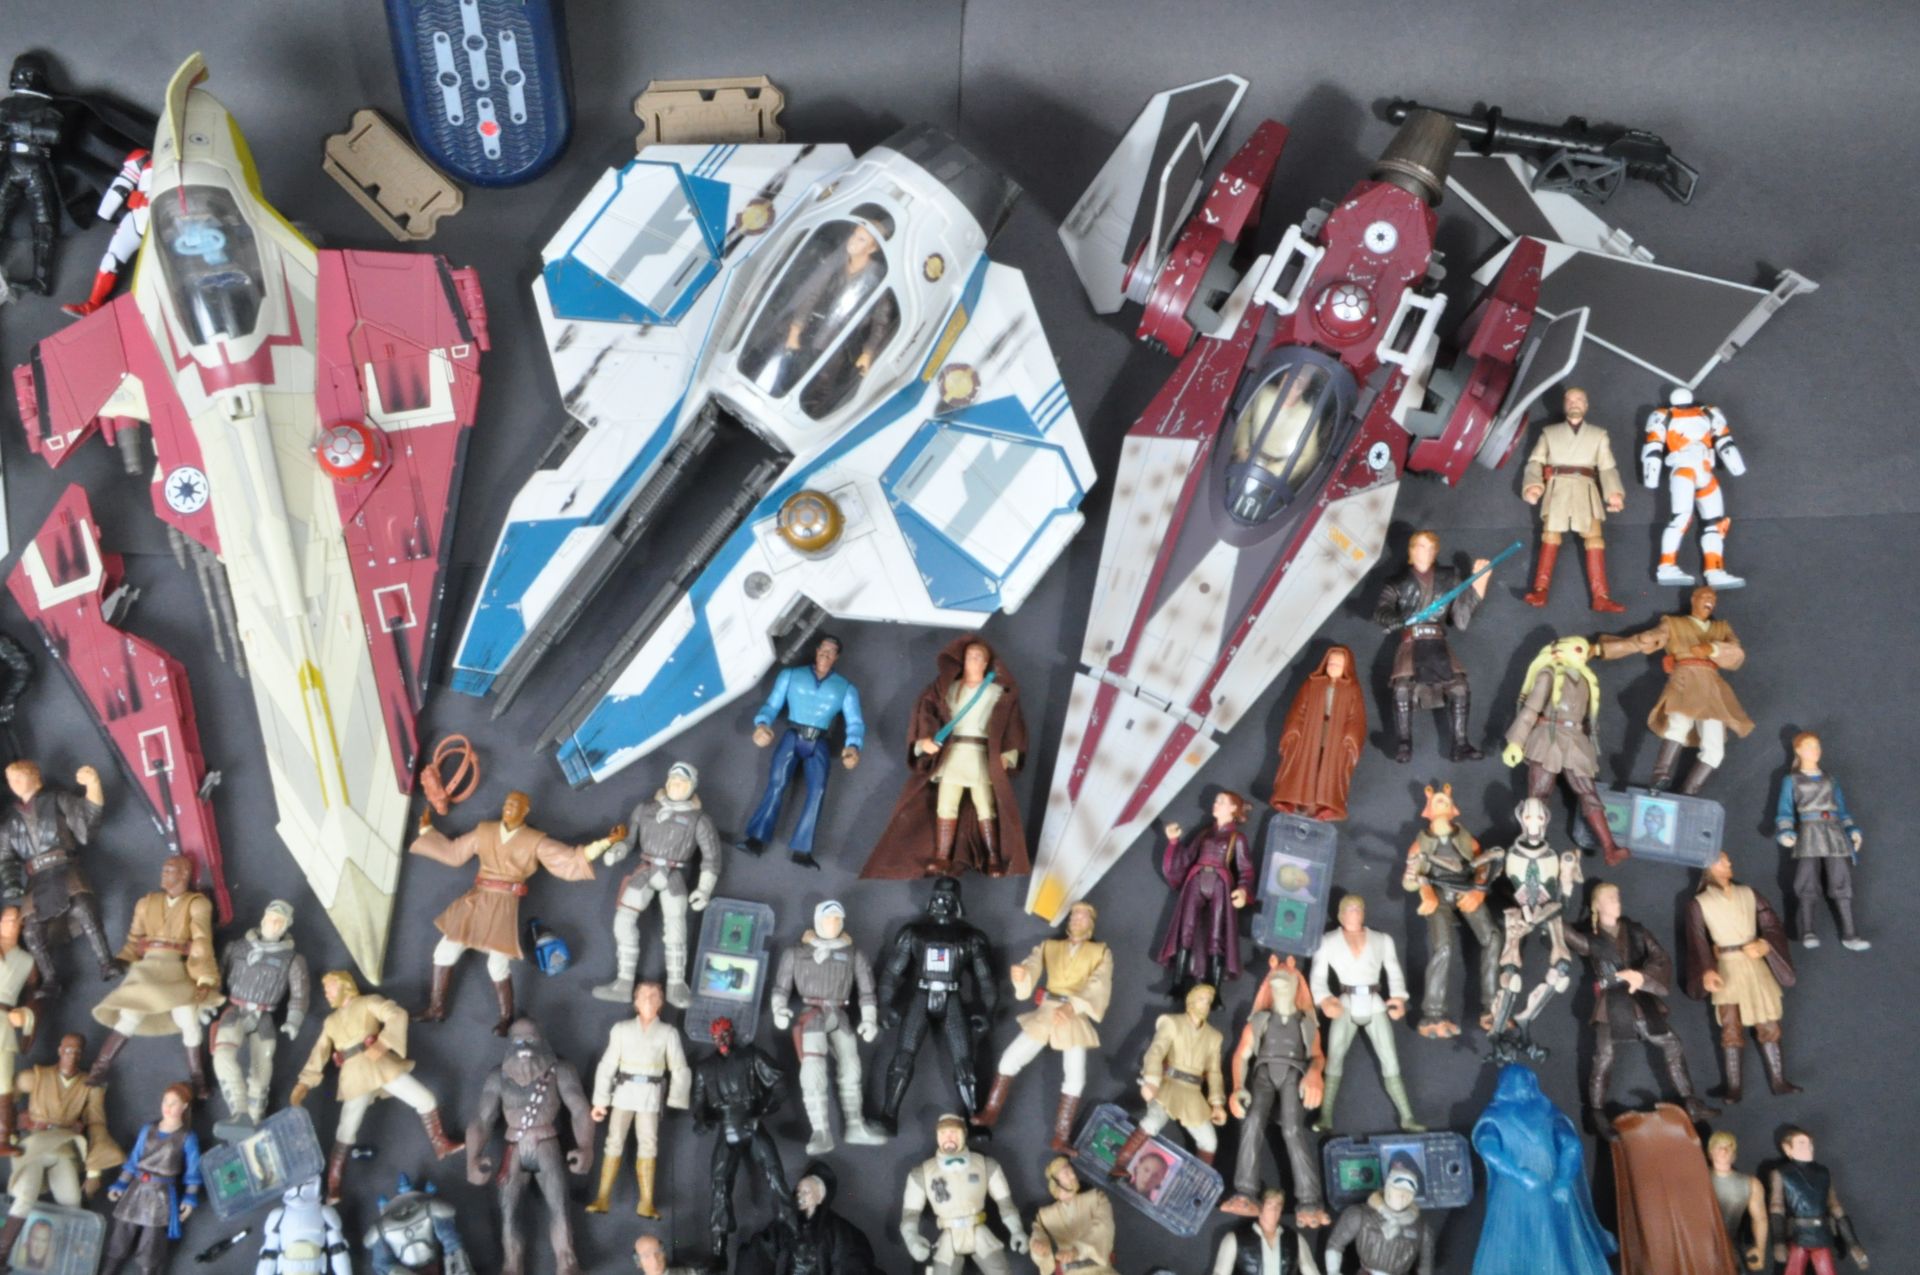 STAR WARS - LARGE COLLECTION KENNER / HASBRO CLONE WARS & OTHER FIGURES - Image 5 of 10